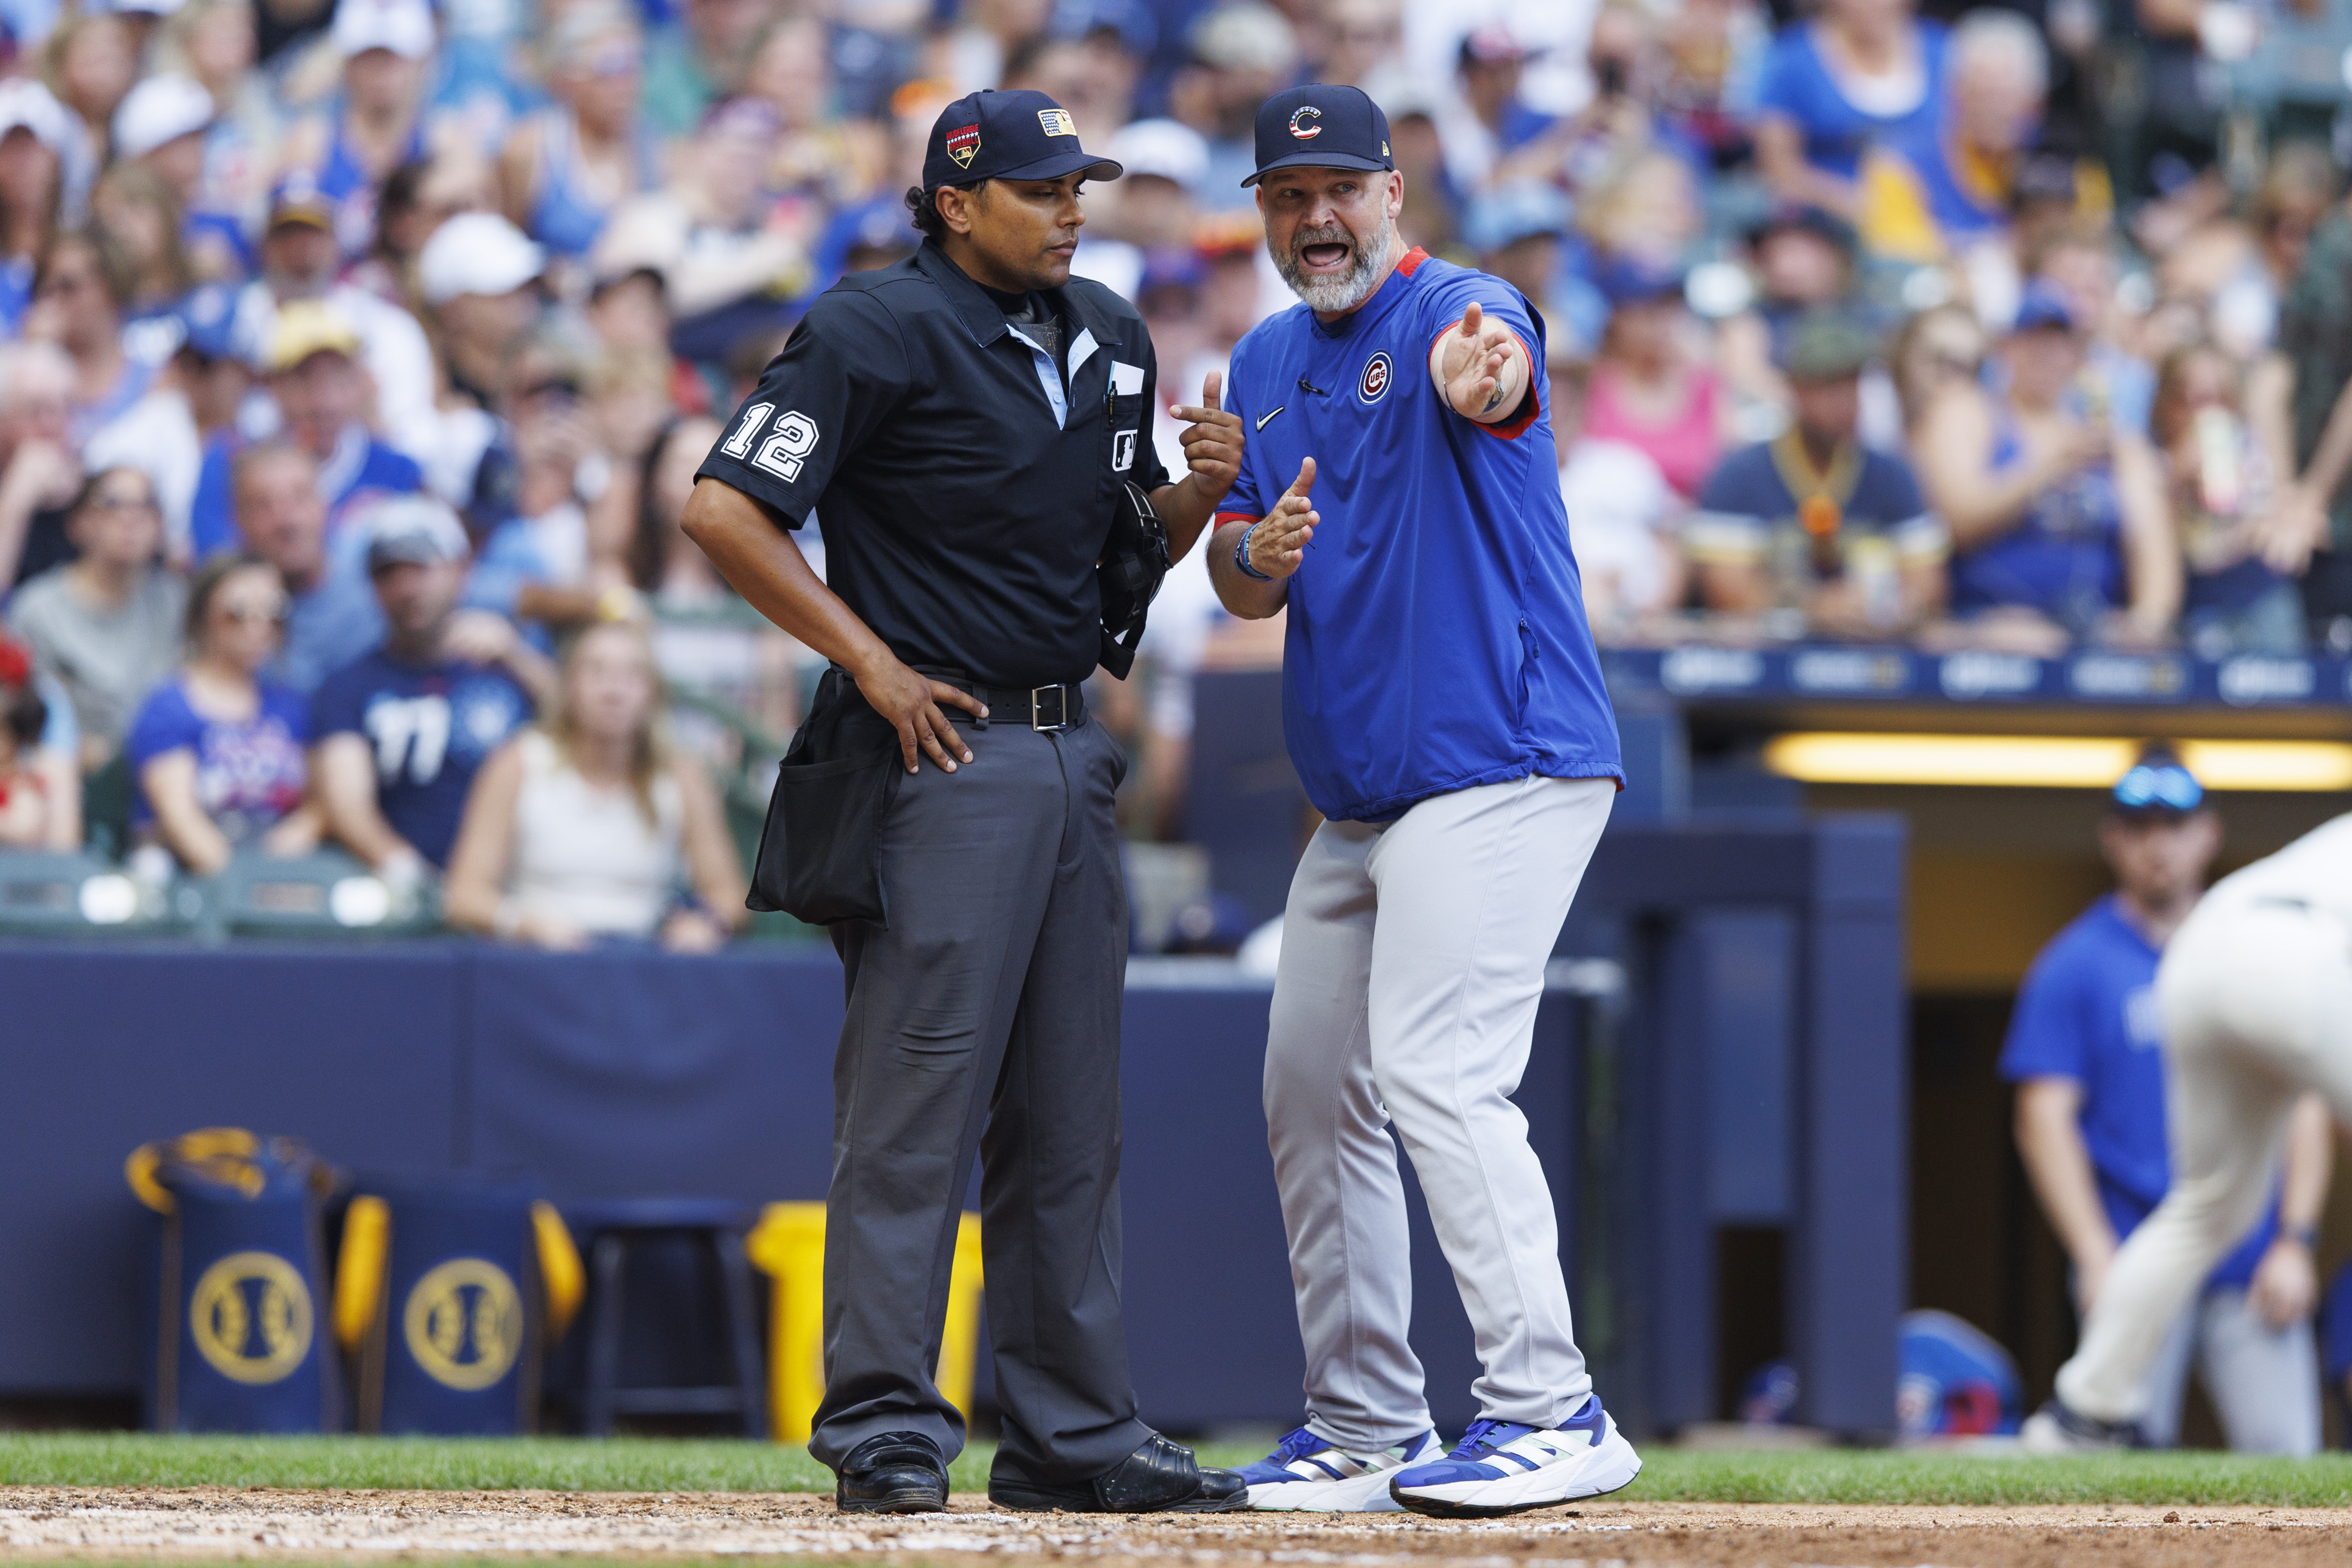 Brewers' Willy Adames got ejected after spiteful sequence from umpire